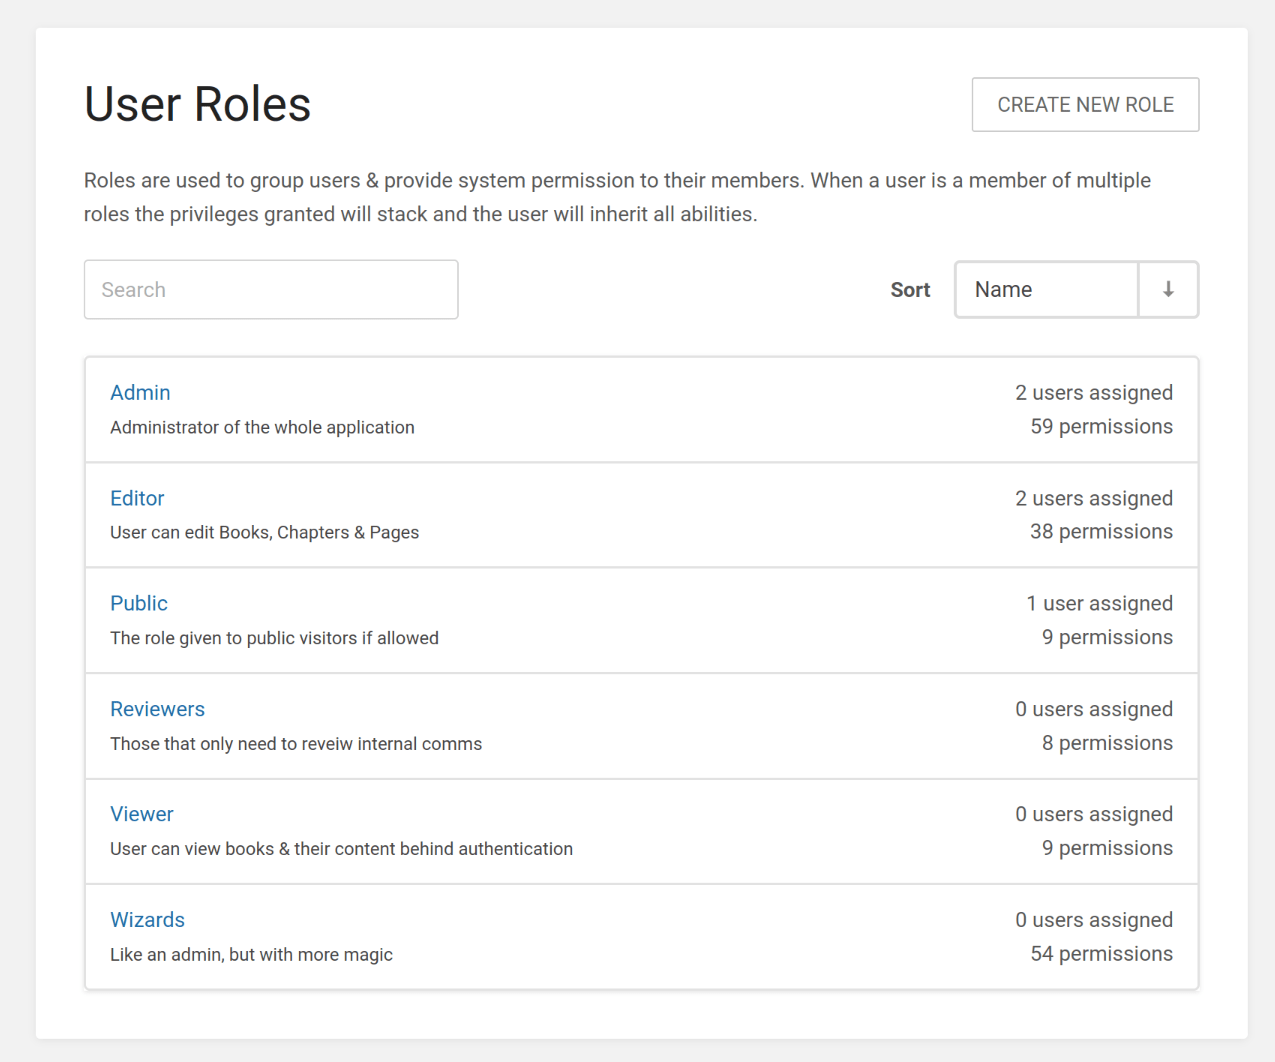 List of roles with a search bar and sort options